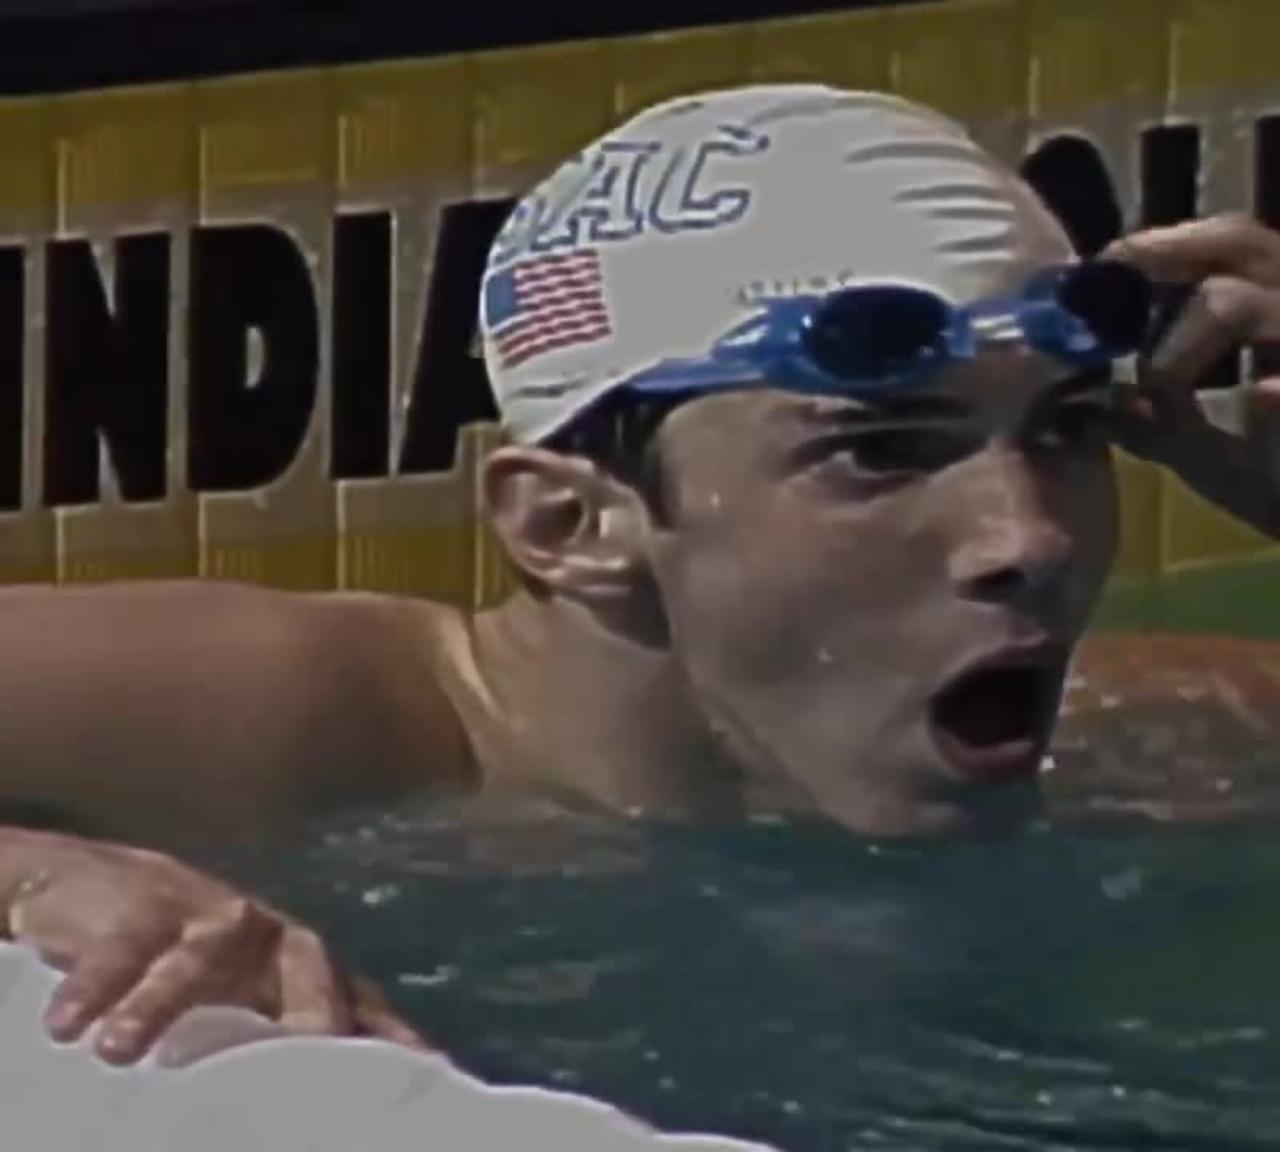 Michael Phelps was 6’3” at age 15